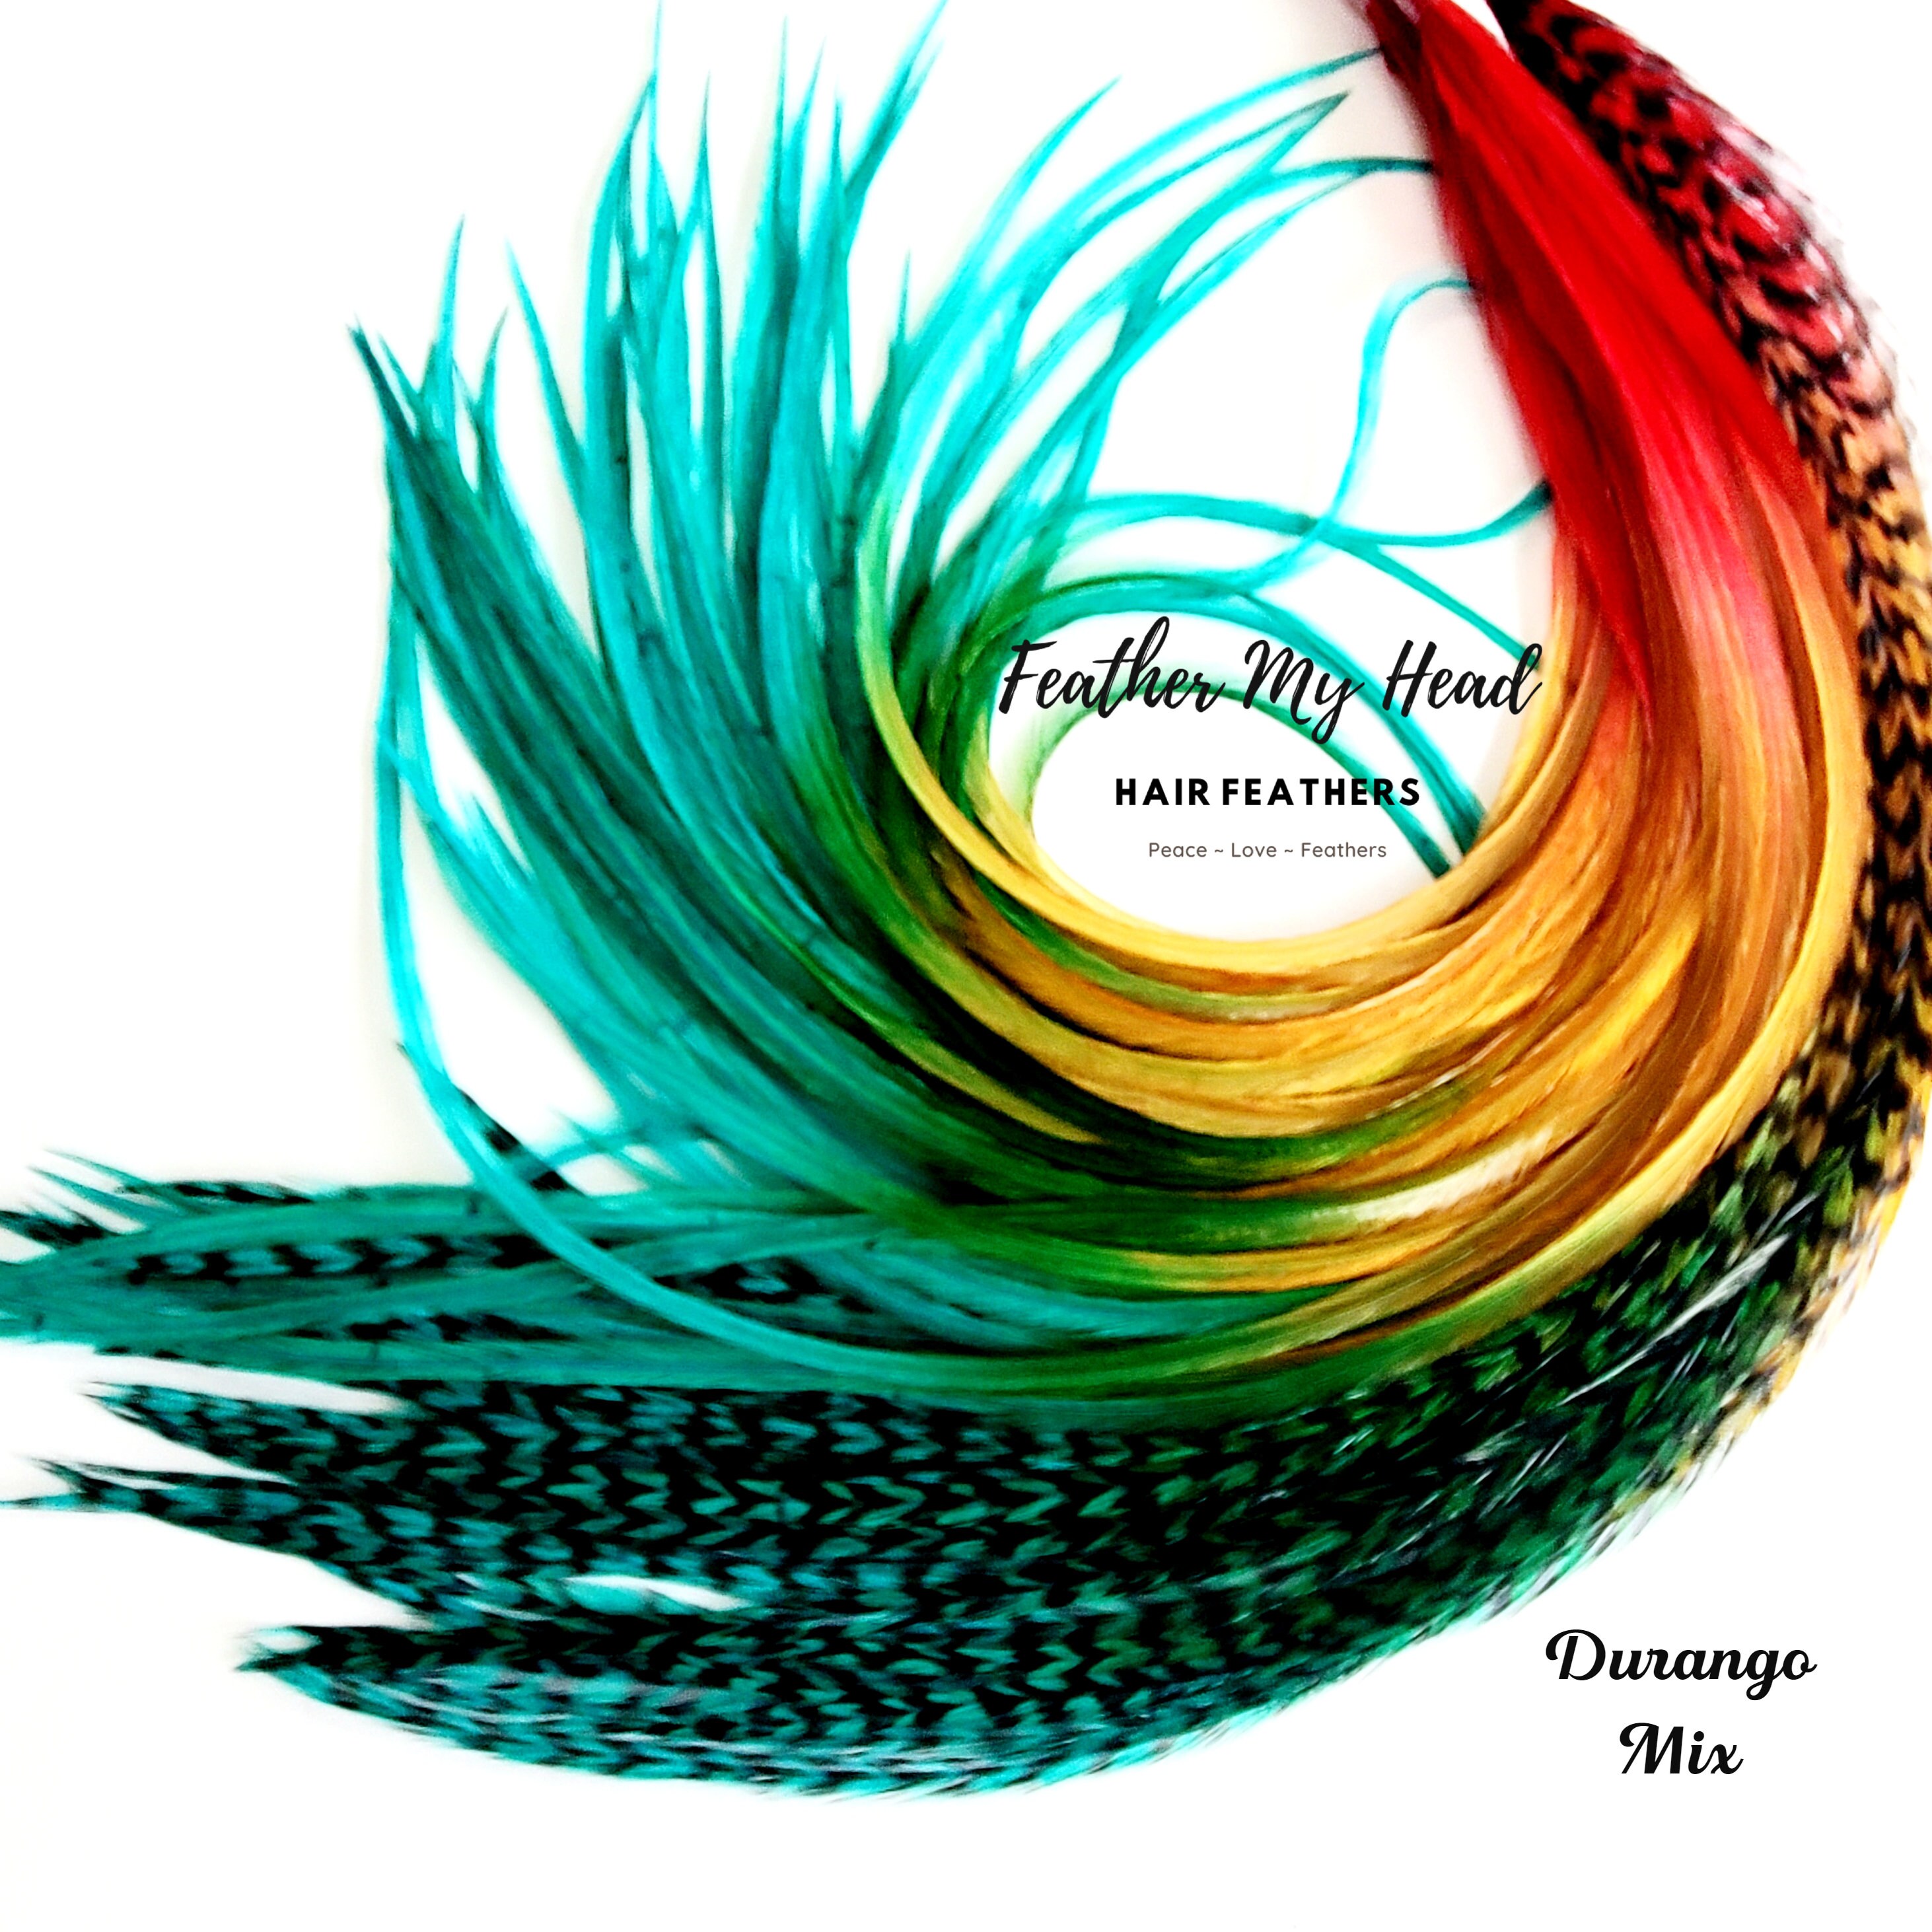 Feather Hair Extension Kit, 6 Multi Colored Tie Dye Long Feathers